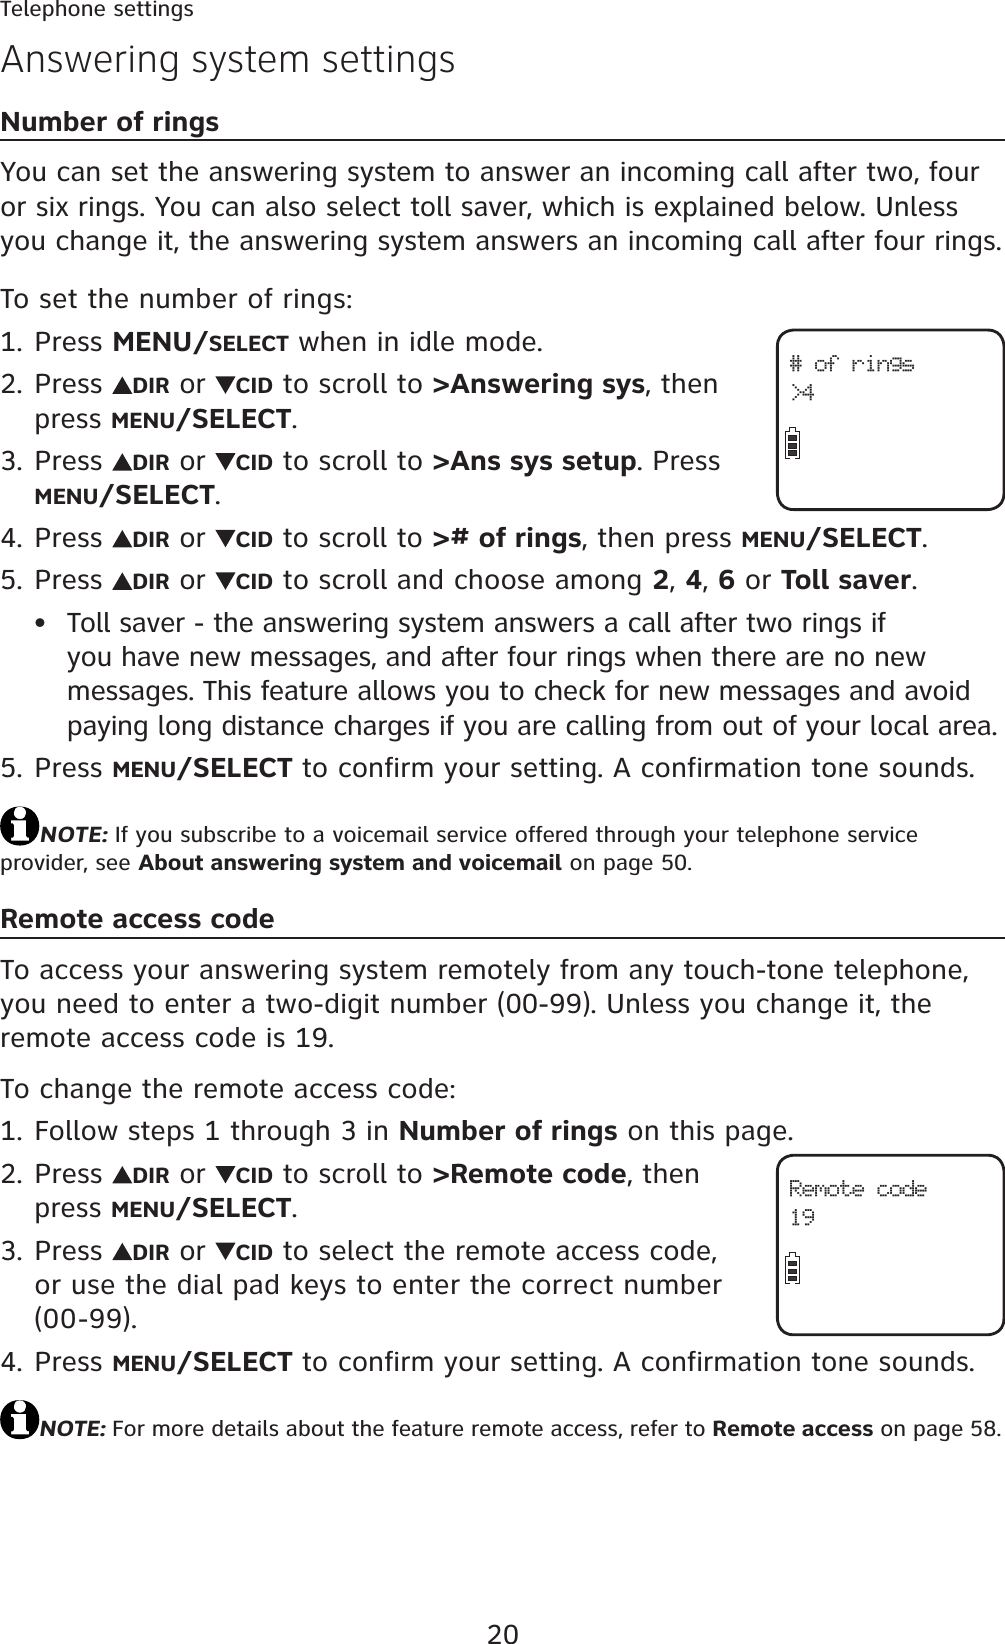 20Telephone settingsNumber of ringsYou can set the answering system to answer an incoming call after two, four or six rings. You can also select toll saver, which is explained below. Unless you change it, the answering system answers an incoming call after four rings.To set the number of rings:Press MENU/SELECT when in idle mode.Press  DIR or  CID to scroll to &gt;Answering sys, then press MENU/SELECT.Press  DIR or  CID to scroll to &gt;Ans sys setup. Press MENU/SELECT.Press  DIR or  CID to scroll to &gt;# of rings, then press MENU/SELECT.Press  DIR or  CID to scroll and choose among 2,4,6 or Toll saver.Toll saver - the answering system answers a call after two rings if you have new messages, and after four rings when there are no new messages. This feature allows you to check for new messages and avoid paying long distance charges if you are calling from out of your local area.Press MENU/SELECT to confirm your setting. A confirmation tone sounds.NOTE: If you subscribe to a voicemail service offered through your telephone service provider, see About answering system and voicemail on page 50.Remote access codeTo access your answering system remotely from any touch-tone telephone, you need to enter a two-digit number (00-99). Unless you change it, the remote access code is 19.To change the remote access code:Follow steps 1 through 3 in Number of rings on this page.Press  DIR or  CID to scroll to &gt;Remote code, then press MENU/SELECT.Press  DIR or  CID to select the remote access code, or use the dial pad keys to enter the correct number (00-99).Press MENU/SELECT to confirm your setting. A confirmation tone sounds.NOTE: For more details about the feature remote access, refer to Remote access on page 58.1.2.3.4.5.•5.1.2.3.4.Answering system settingsRemote code19# of rings&gt;4